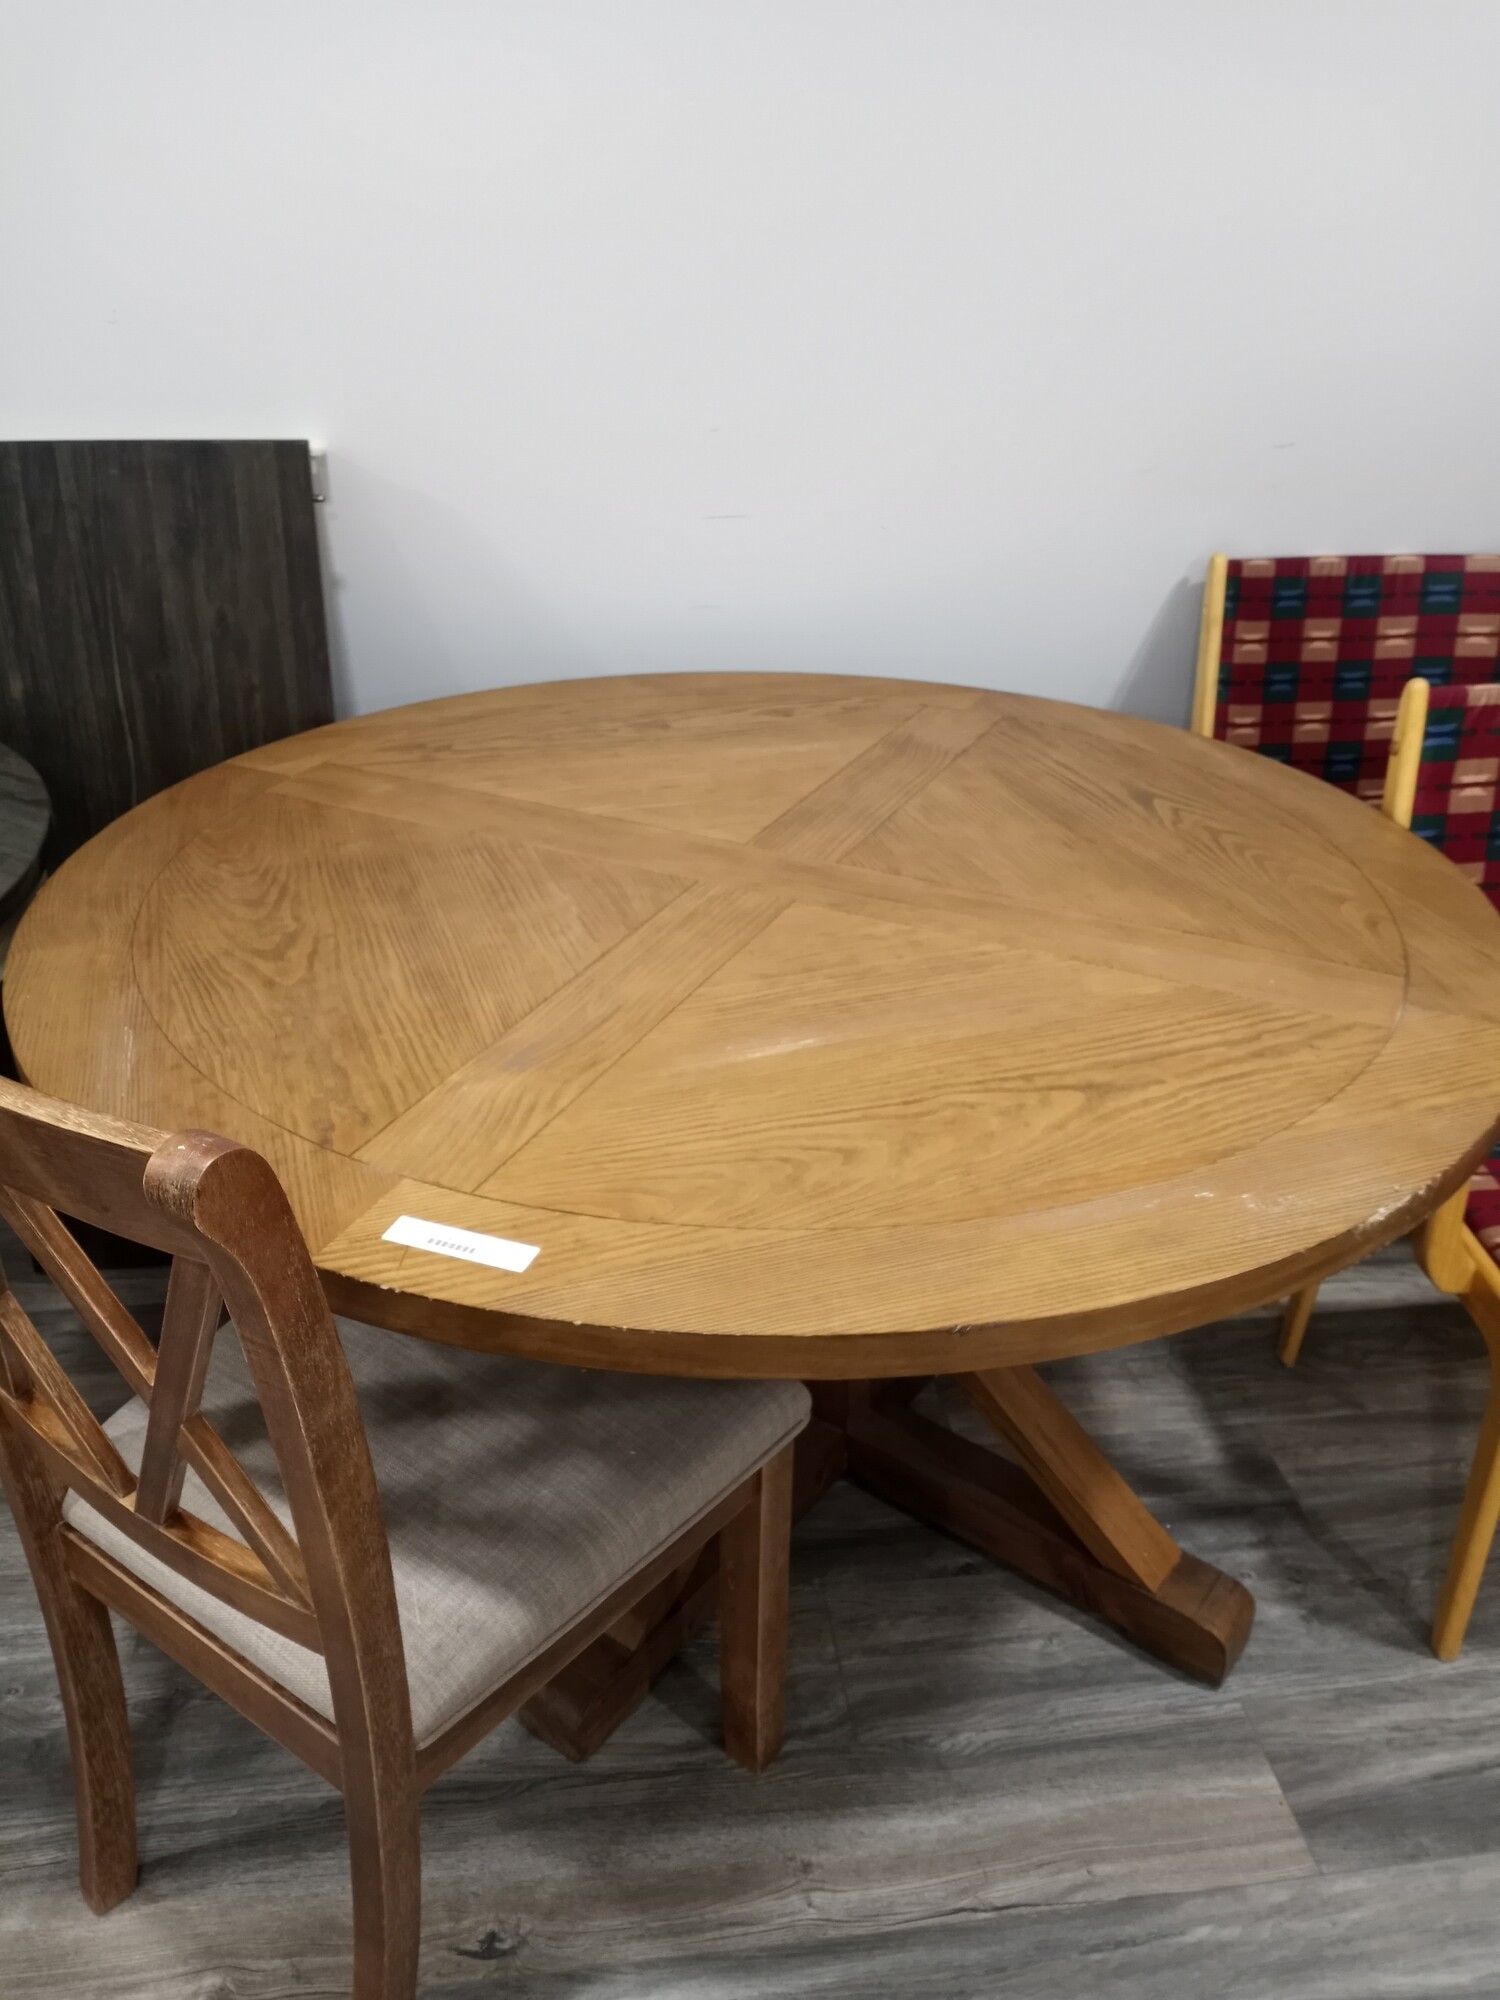 Round Stained Dining Table 1 piece no leaf!